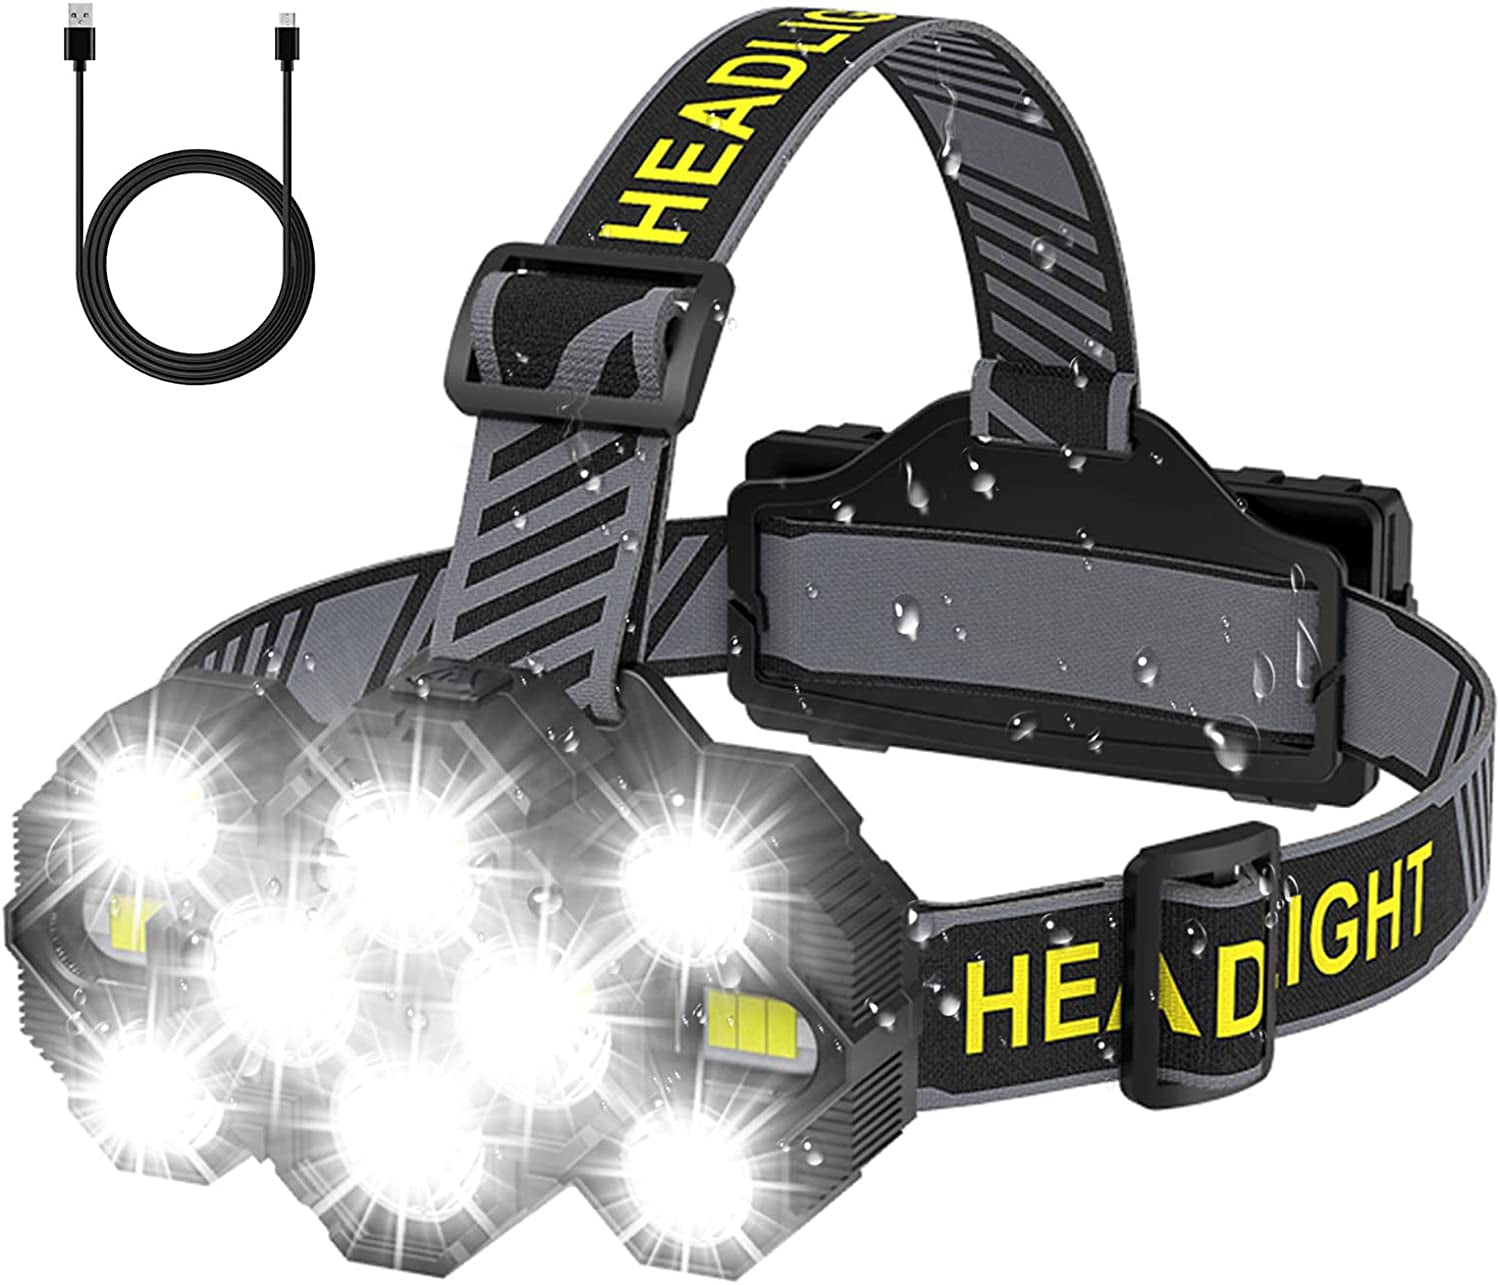 Headlamp Rechargeable, 22000 Lumens Super Bright 10 Leds Head Lamp, 8+2 Modes Head Light with Red Light for Adult, Waterproof Head Flashlight for Outdoor Running, Hunting, Camping, Hiking